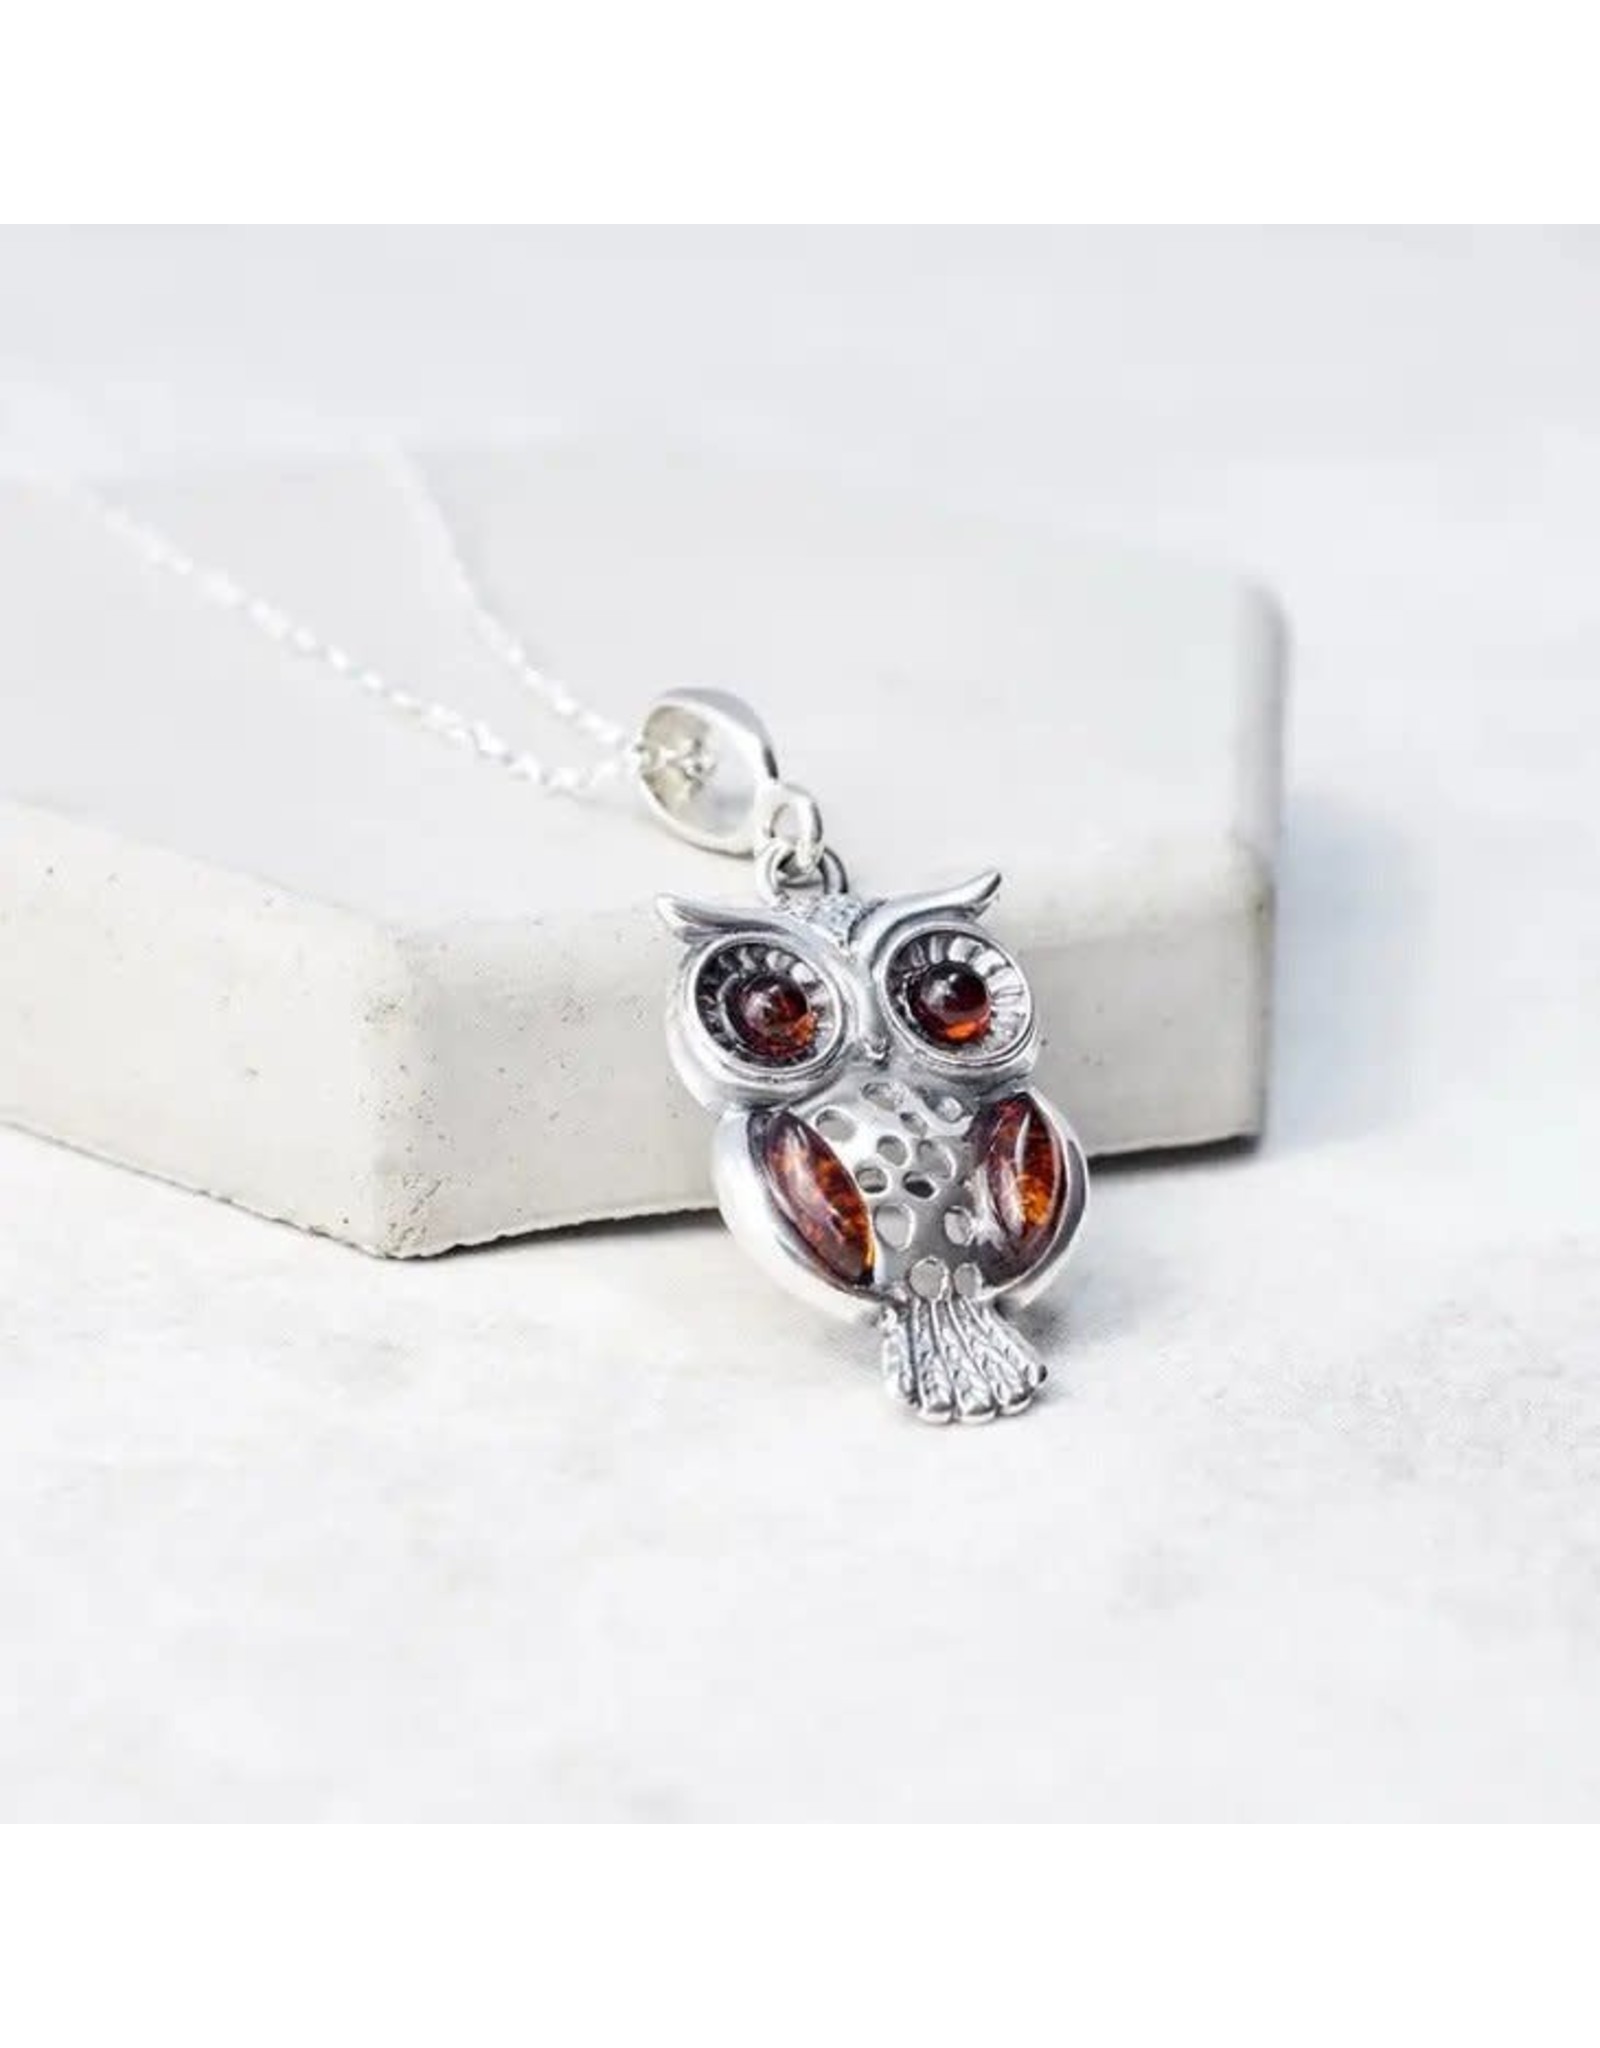 Retro Owl Amber And Sterling Pendant Necklace Tmora Shop 3766